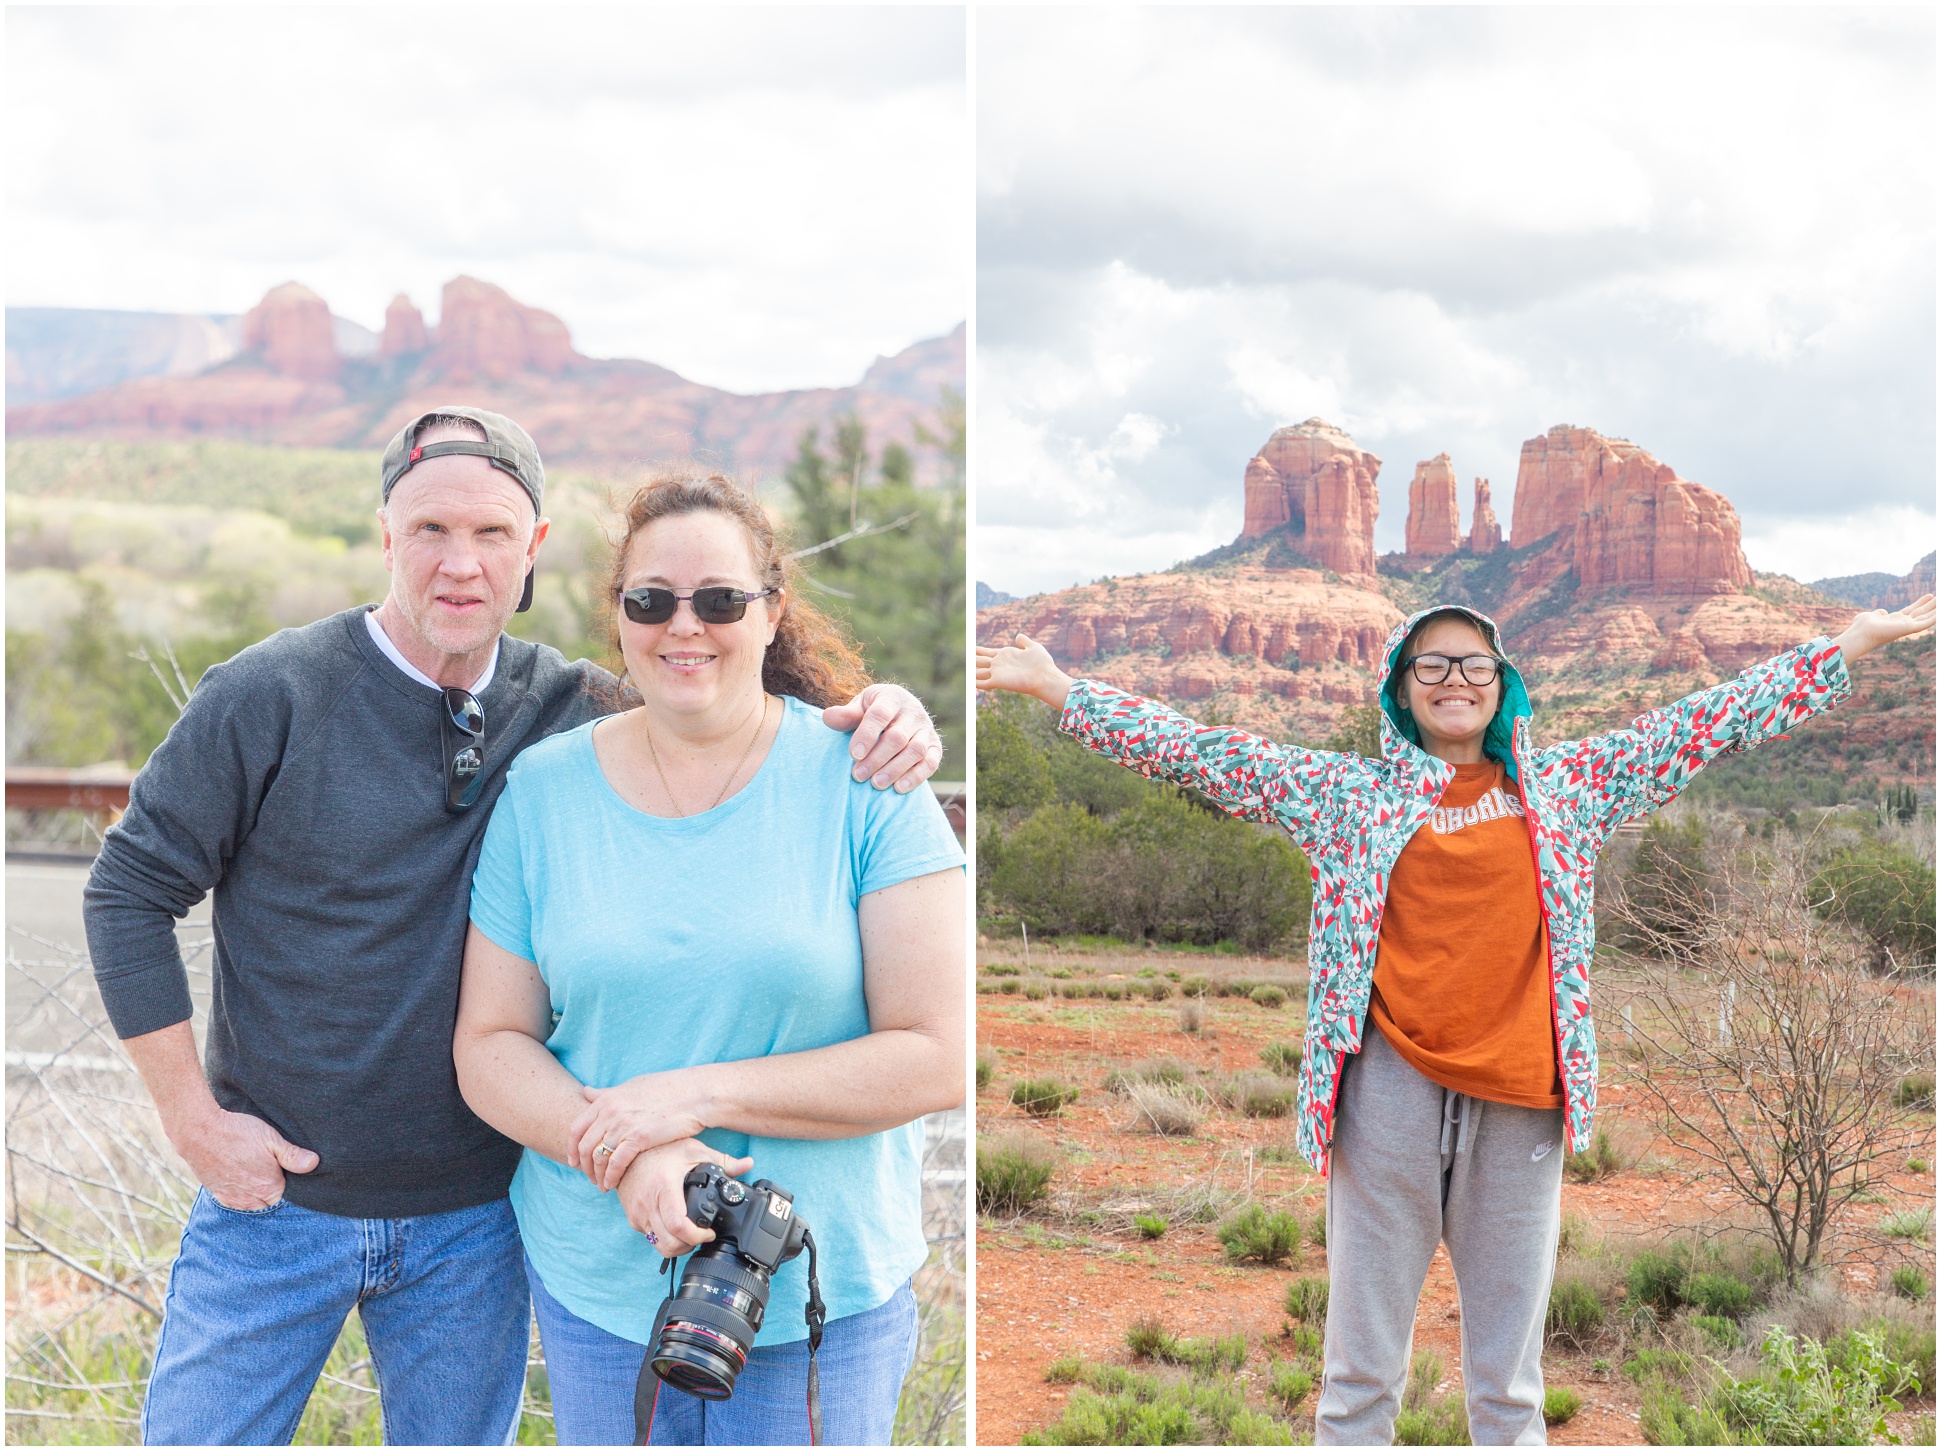 Left Image: My parents in front of the Red Rocks in Sedona, Right IMage: My daughter in front of the red rocks